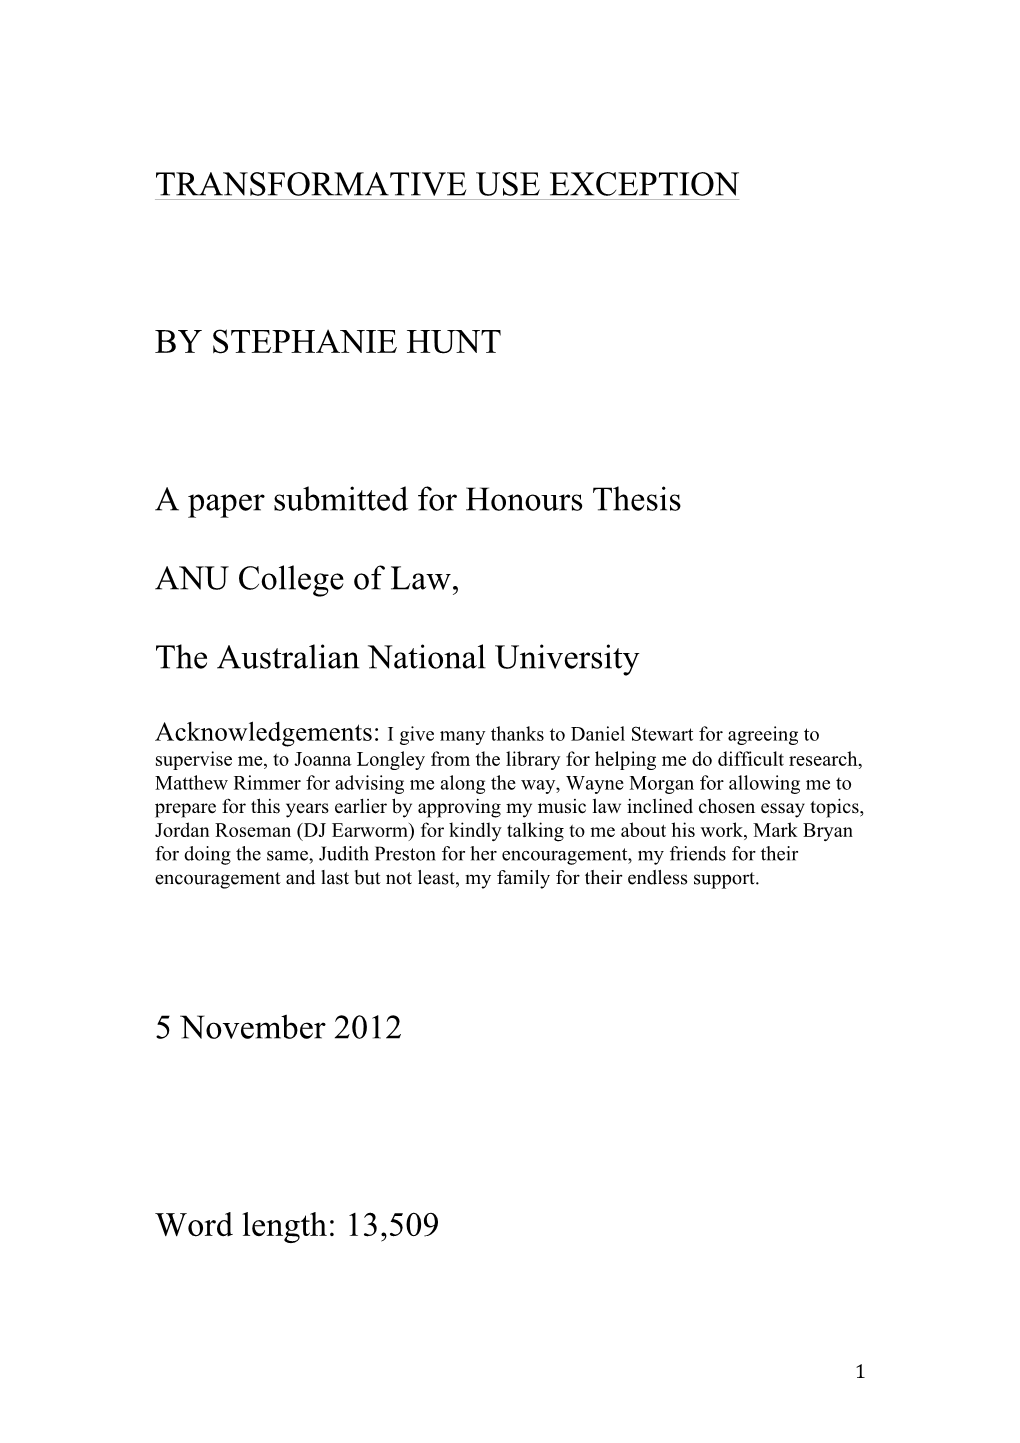 TRANSFORMATIVE USE EXCEPTION by STEPHANIE HUNT a Paper Submitted for Honours Thesis ANU College of Law, the Australian Nationa